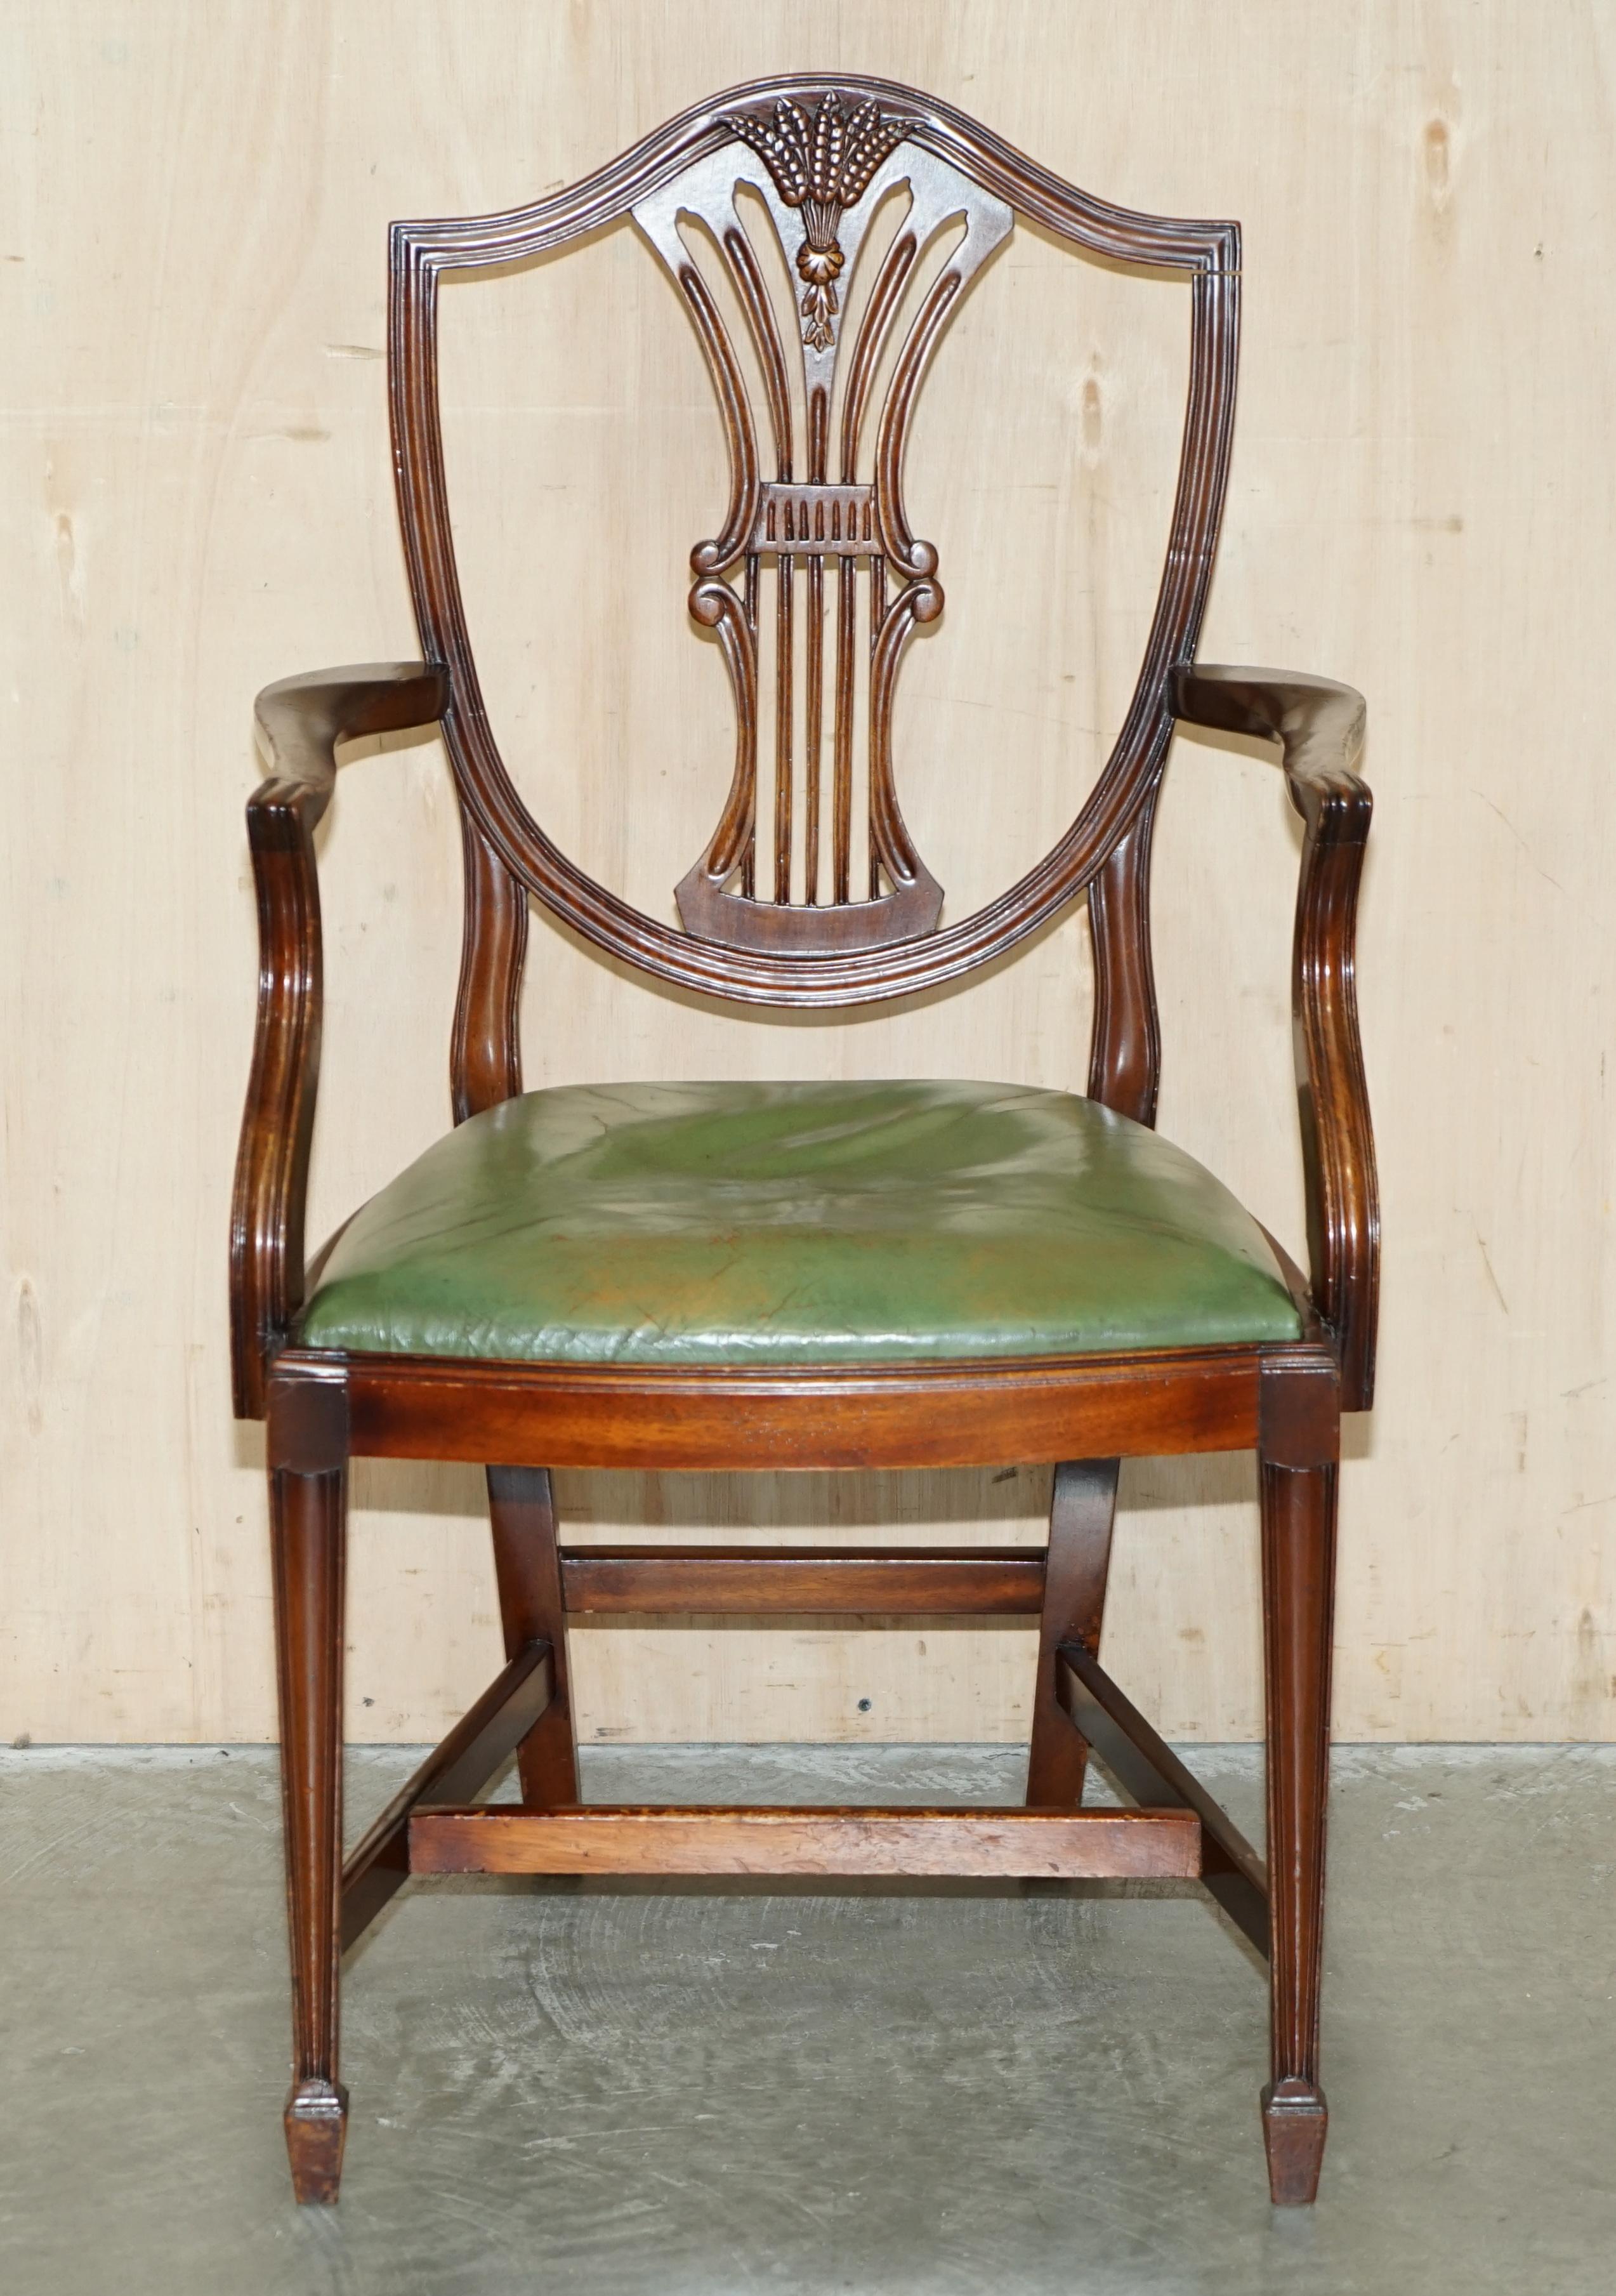 Royal House Antiques

Royal House Antiques is delighted to offer for sale this lovely vintage George Hepplewhite Wheatgrass style carver armchair in Mahogany with the period green leather seat pad to be used as a desk chair 

Please note the